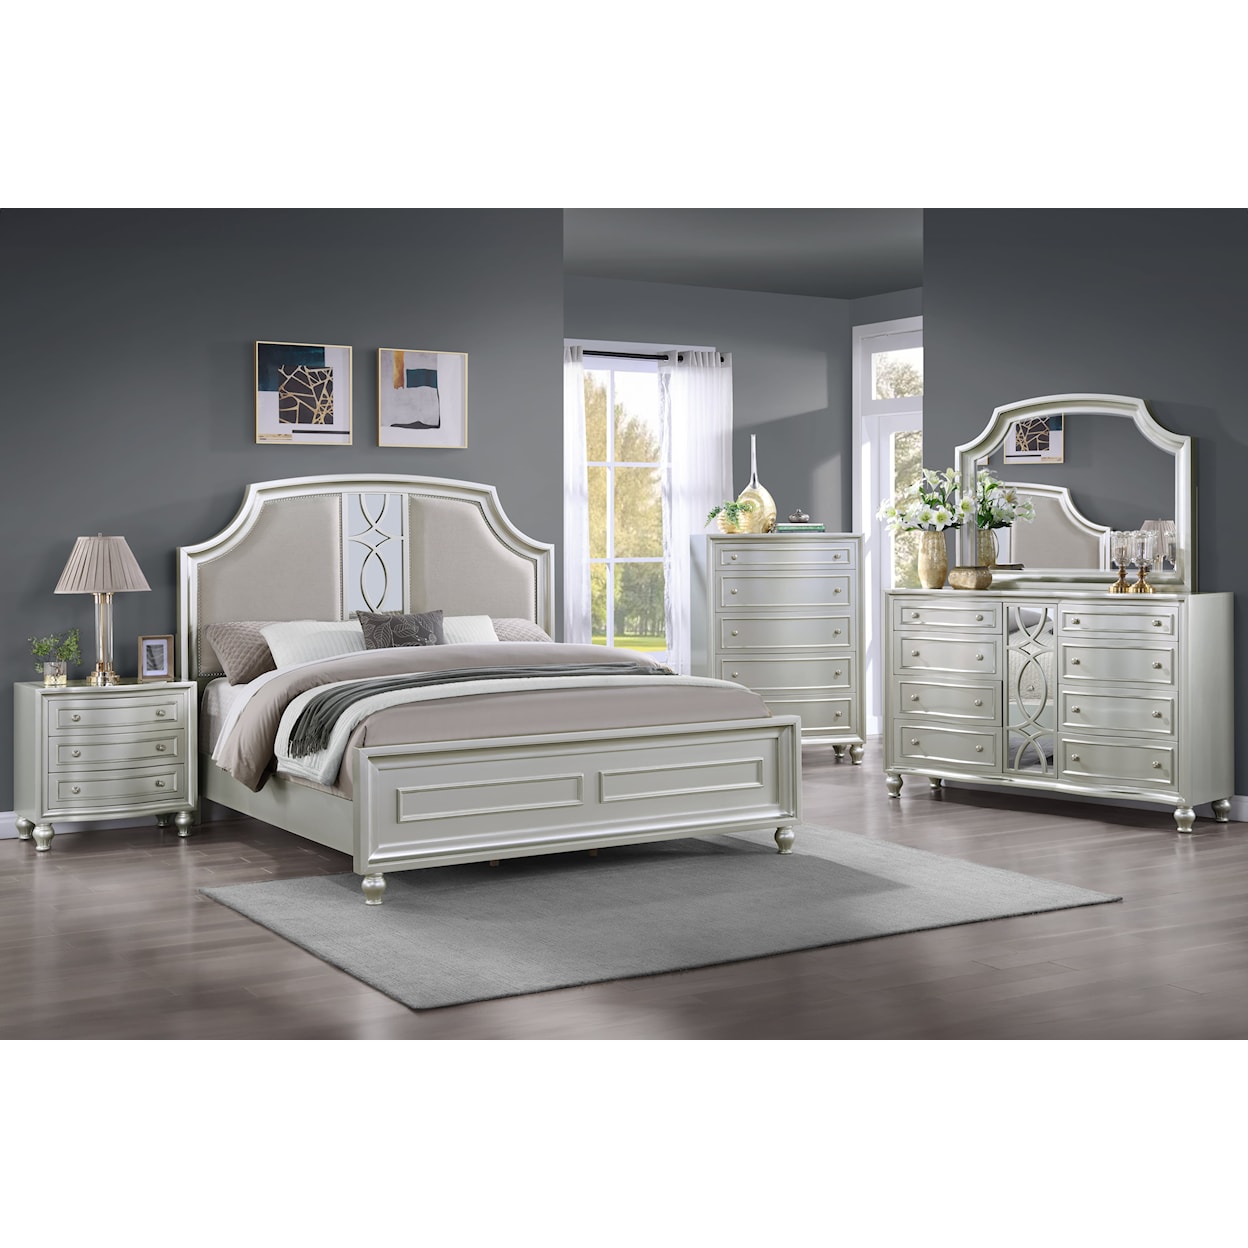 New Classic Furniture Reflections Queen Bed